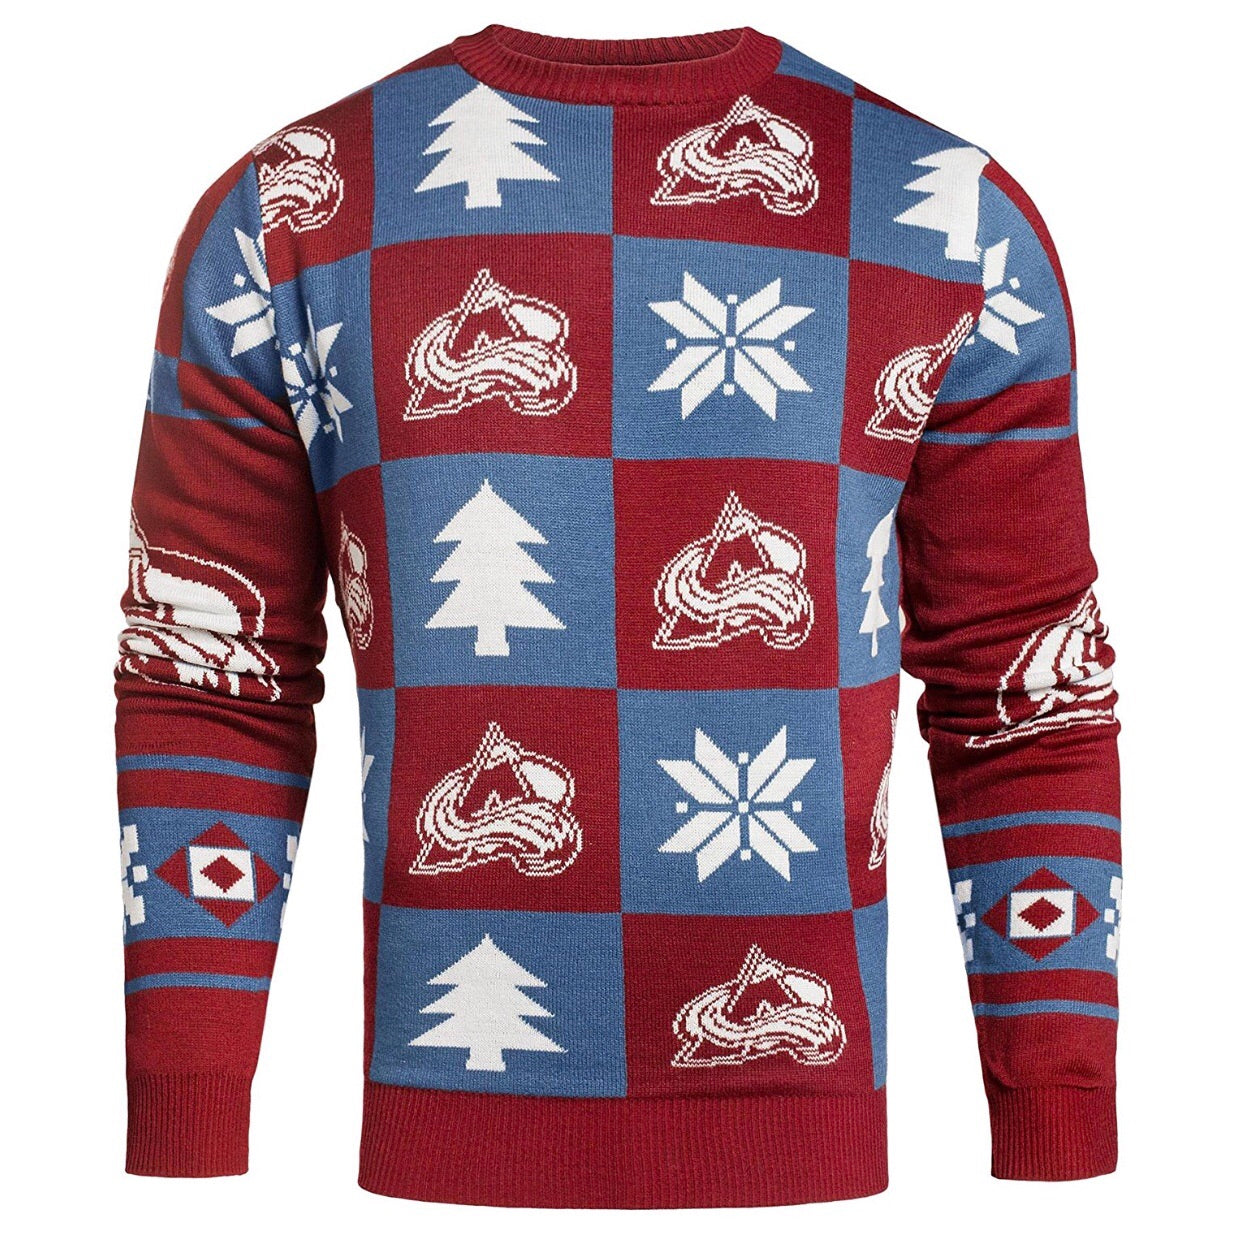 Colorado Avalanche (NHL) Christmas Ugly Sweater iPhone Wal…